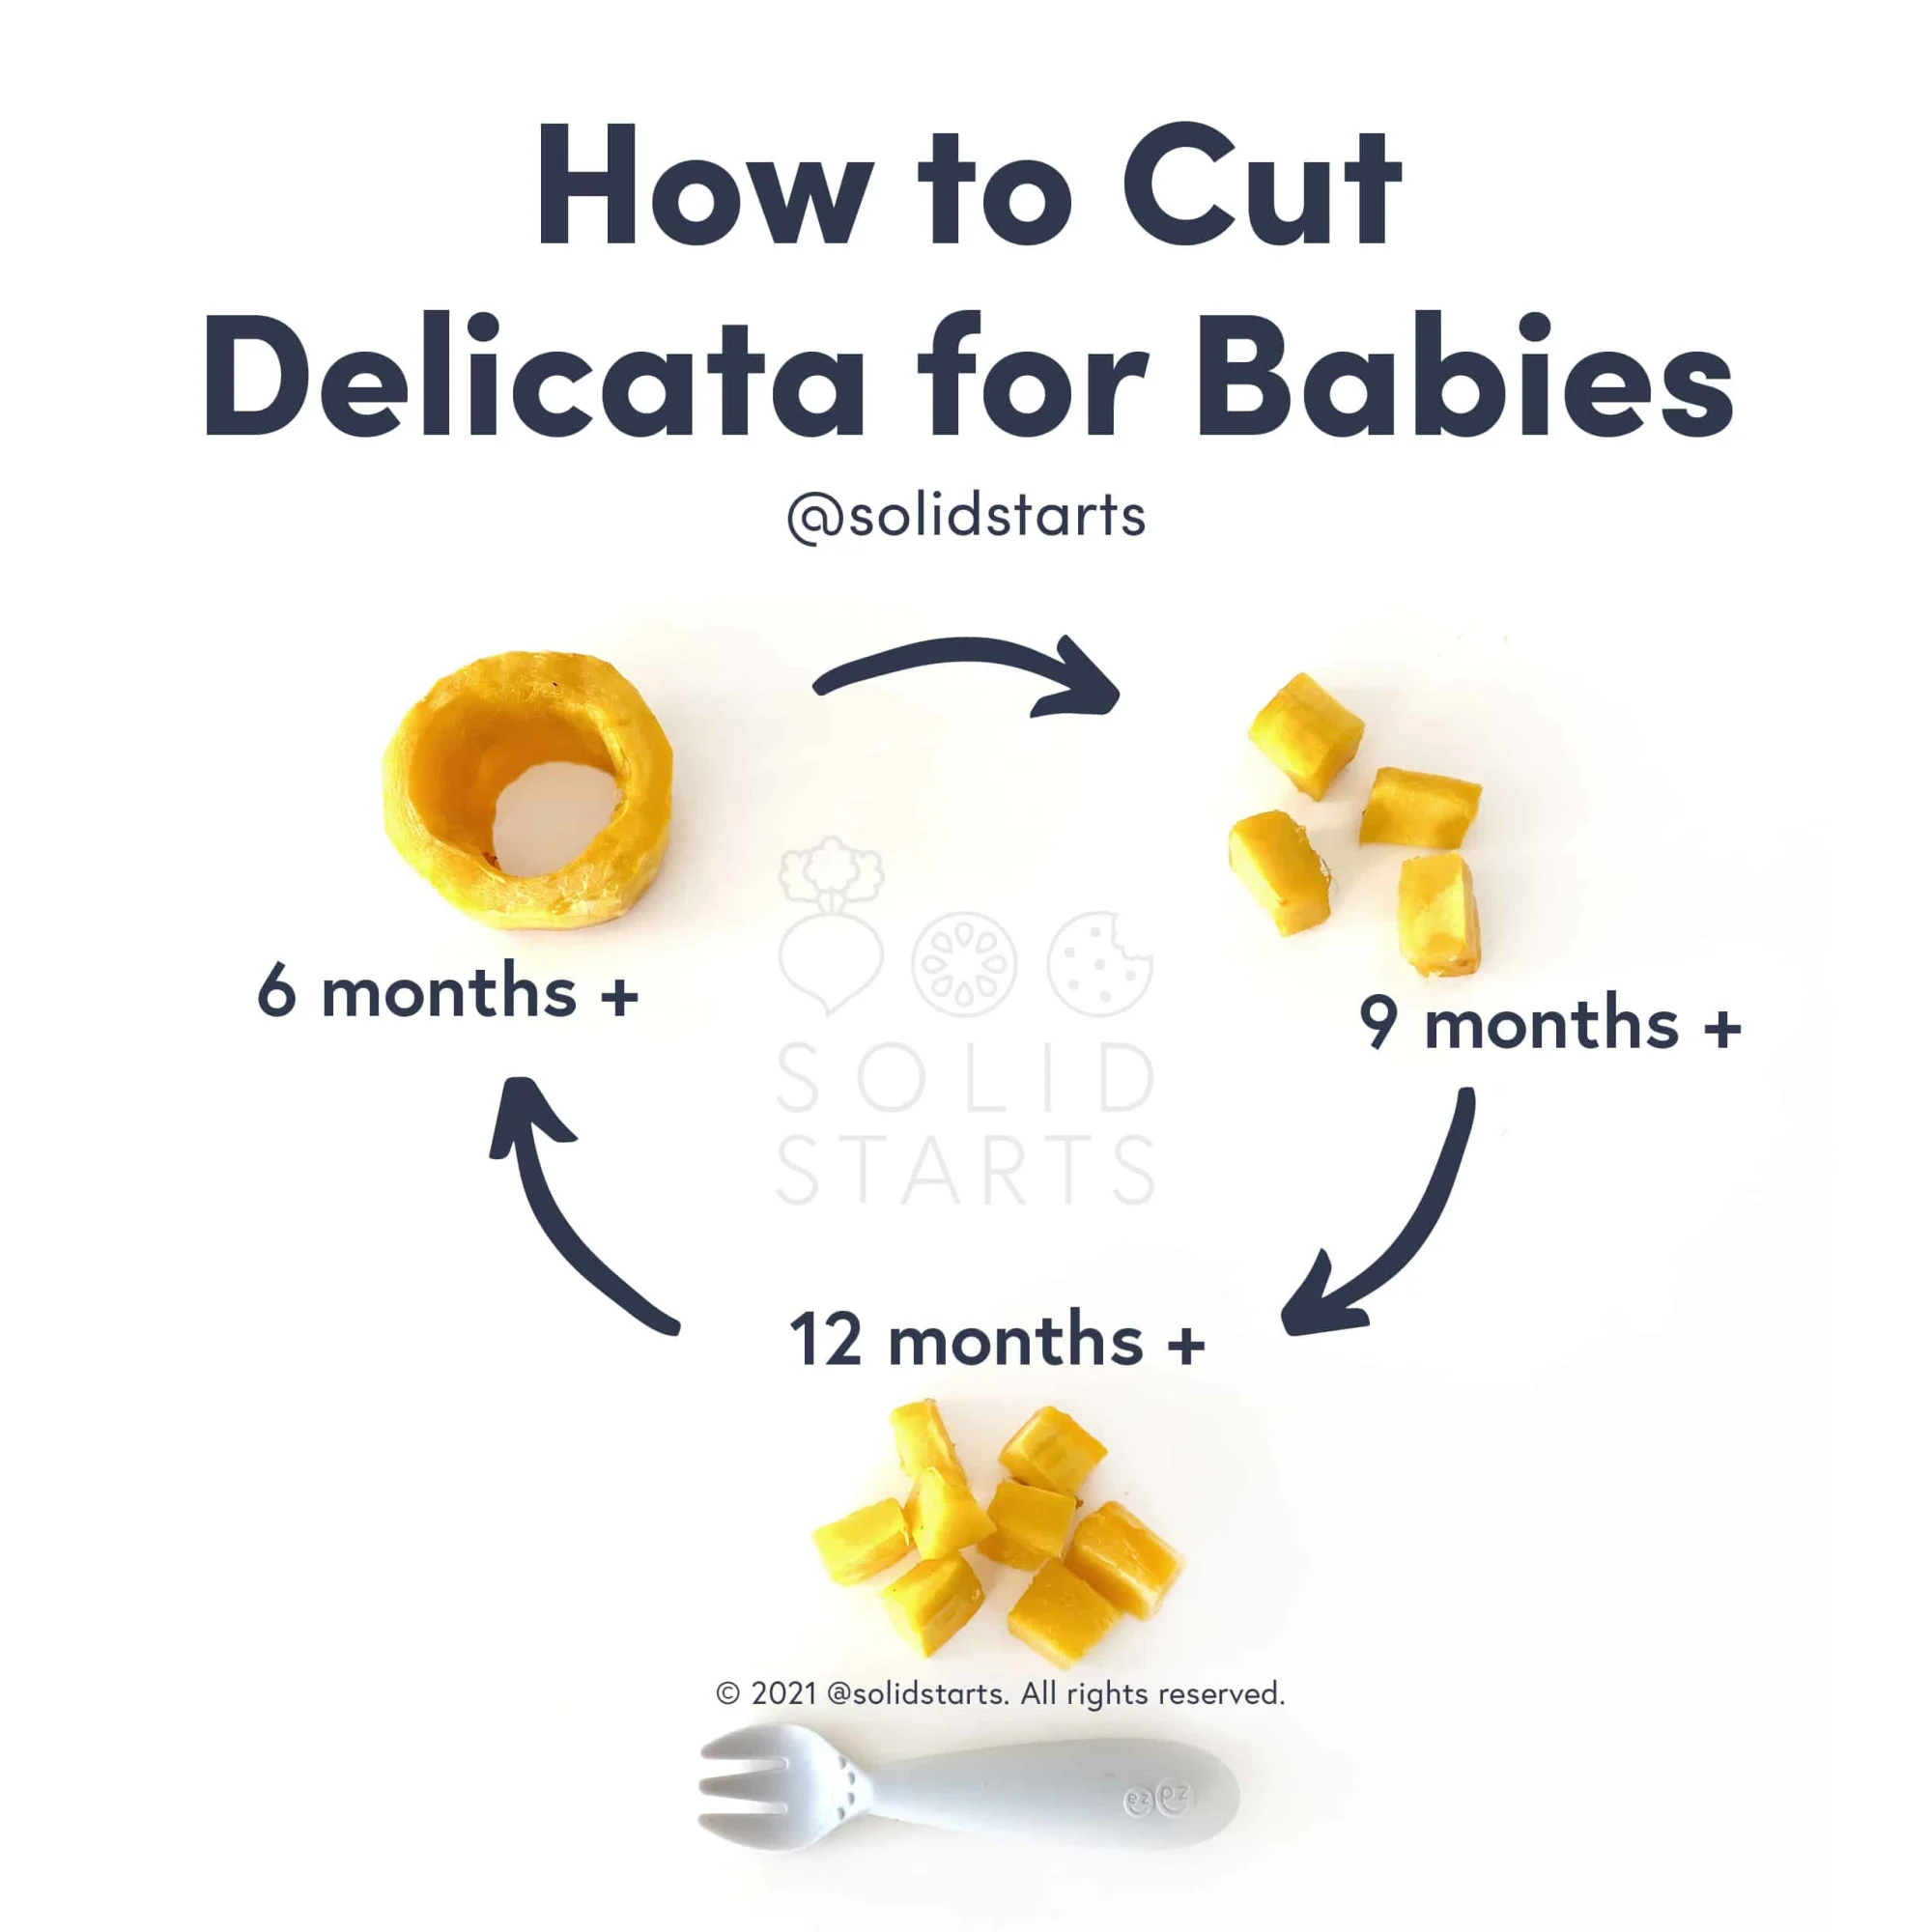 an infographic with the header "how to cut delicata for babies": a cooked ring of delicata for 6 months+, bite sized pieces for 9 months +, and bite sized pieces with a fork for 12 months+